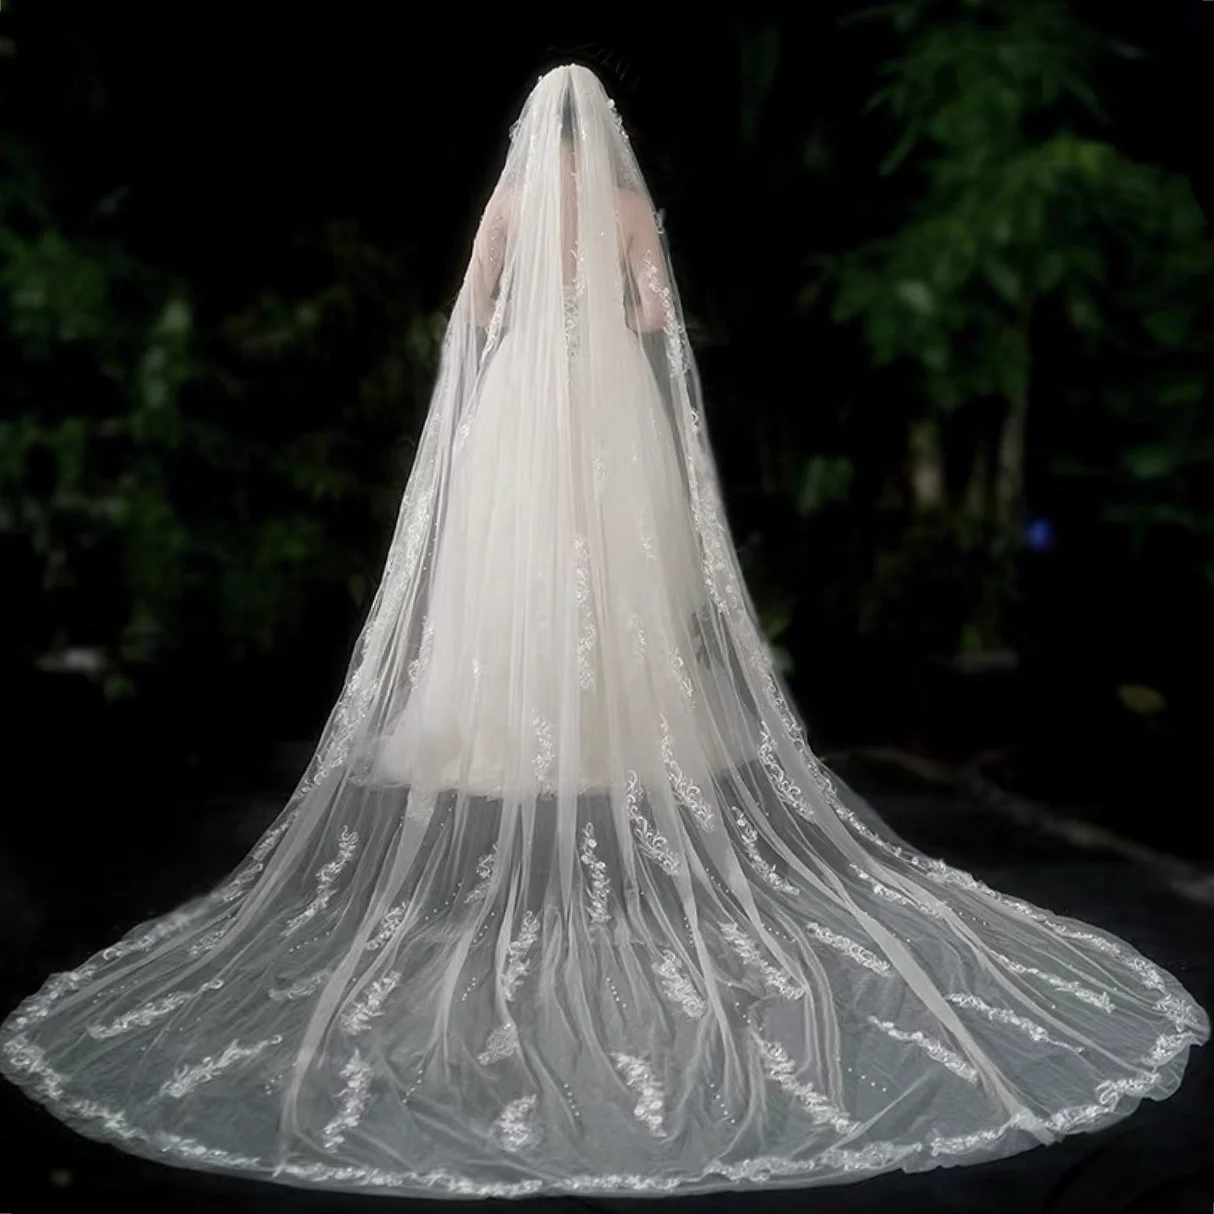 New Lace Edge Wedding Bridal Veils 2 Layer Cathedral Long Length veil With Comb 